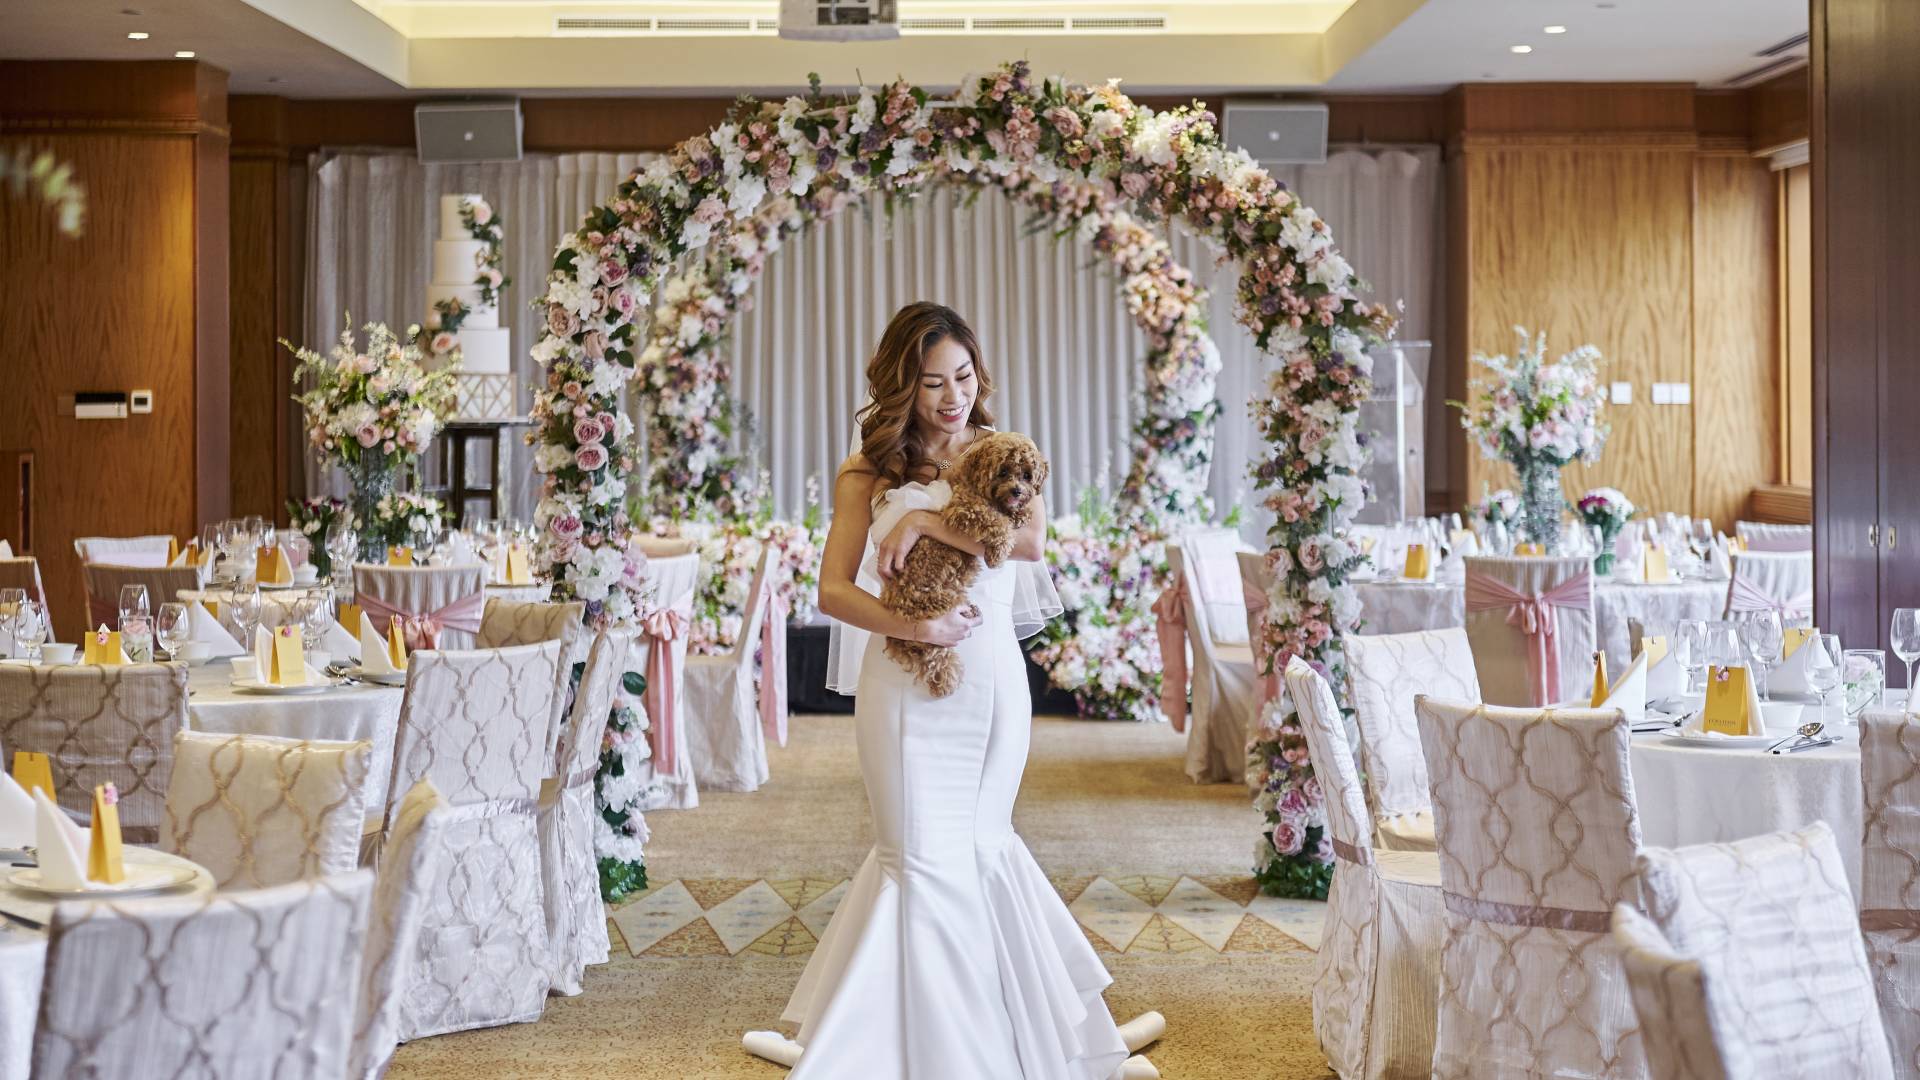 Asian bride in a white wedding dress craddling a small dog in the Tanglin meeting room-transition